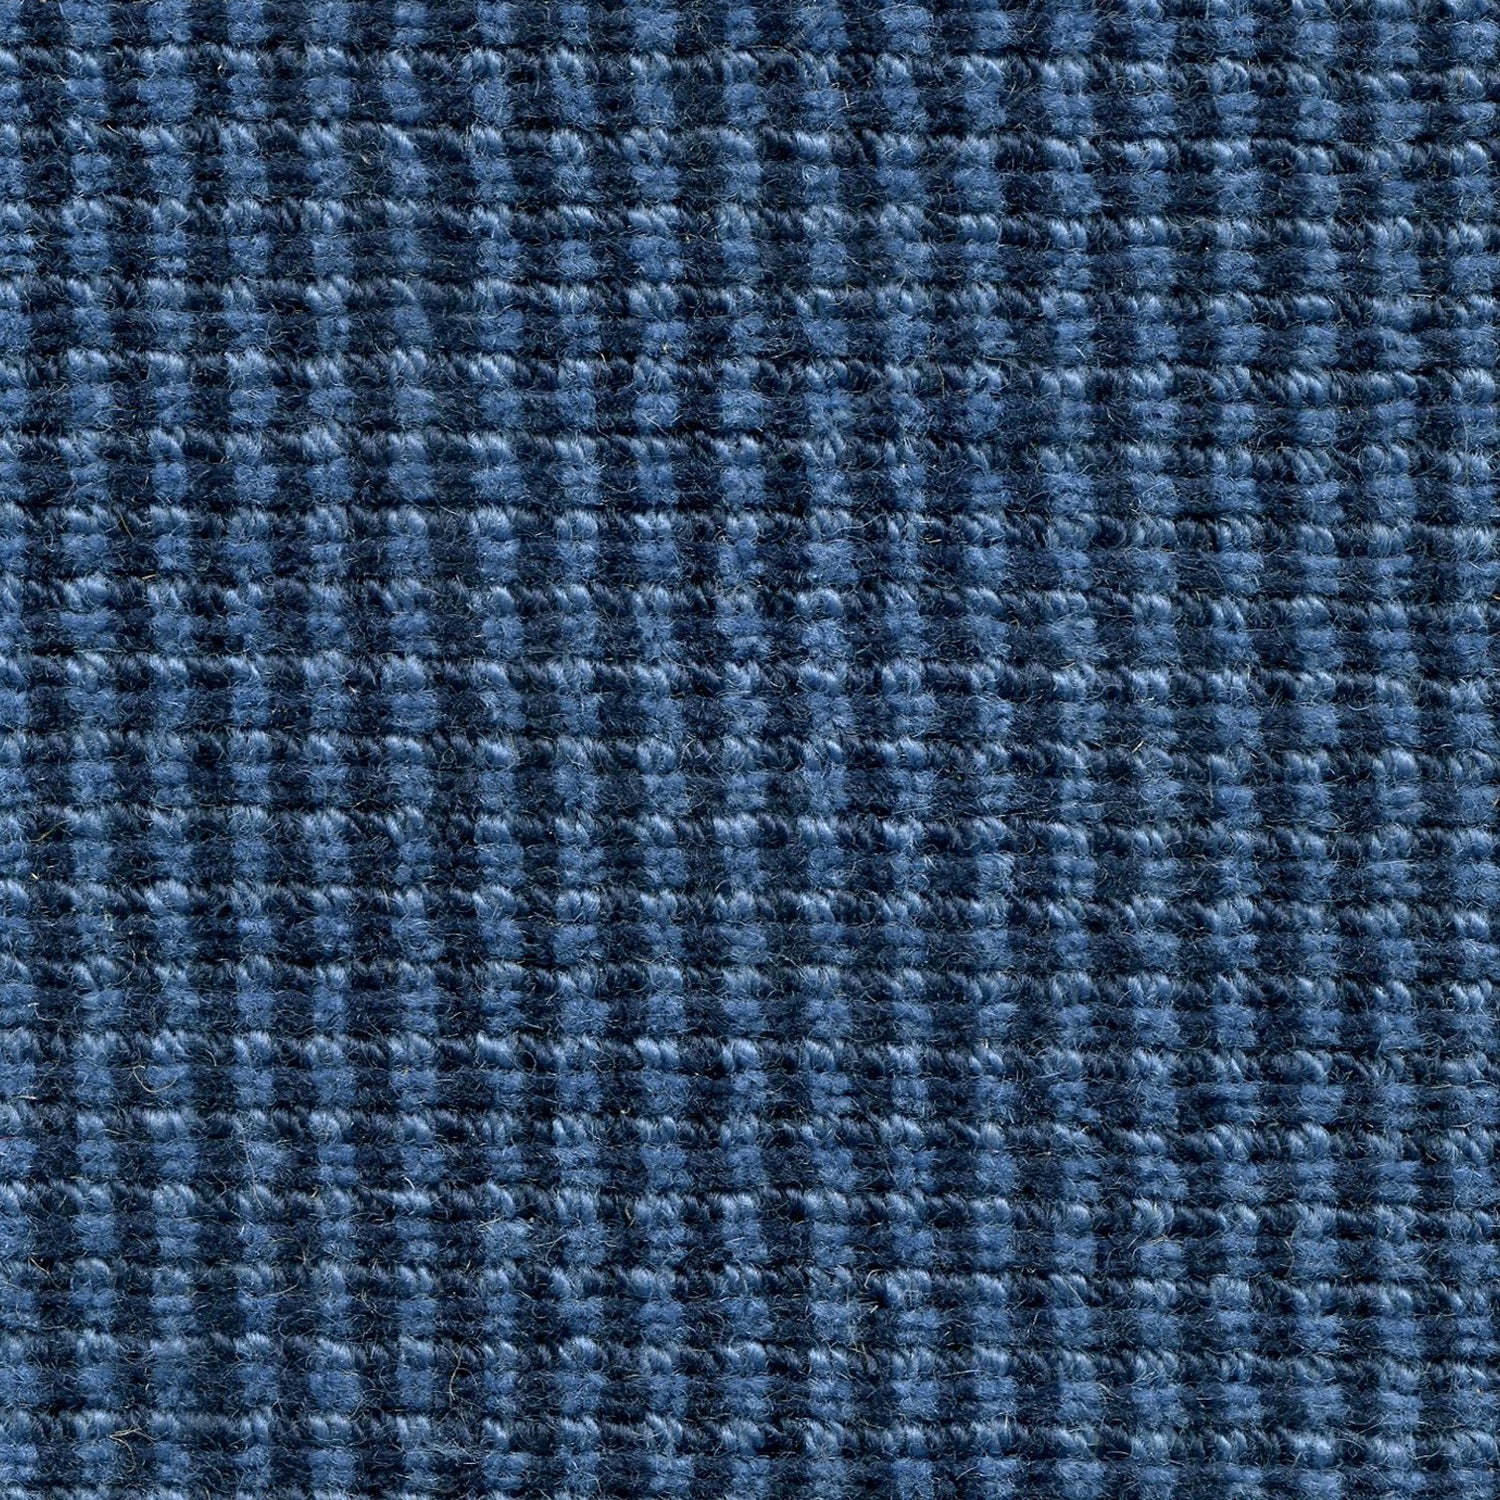 Wool broadloom carpet swatch in a high-pile striped weave in blue and navy.